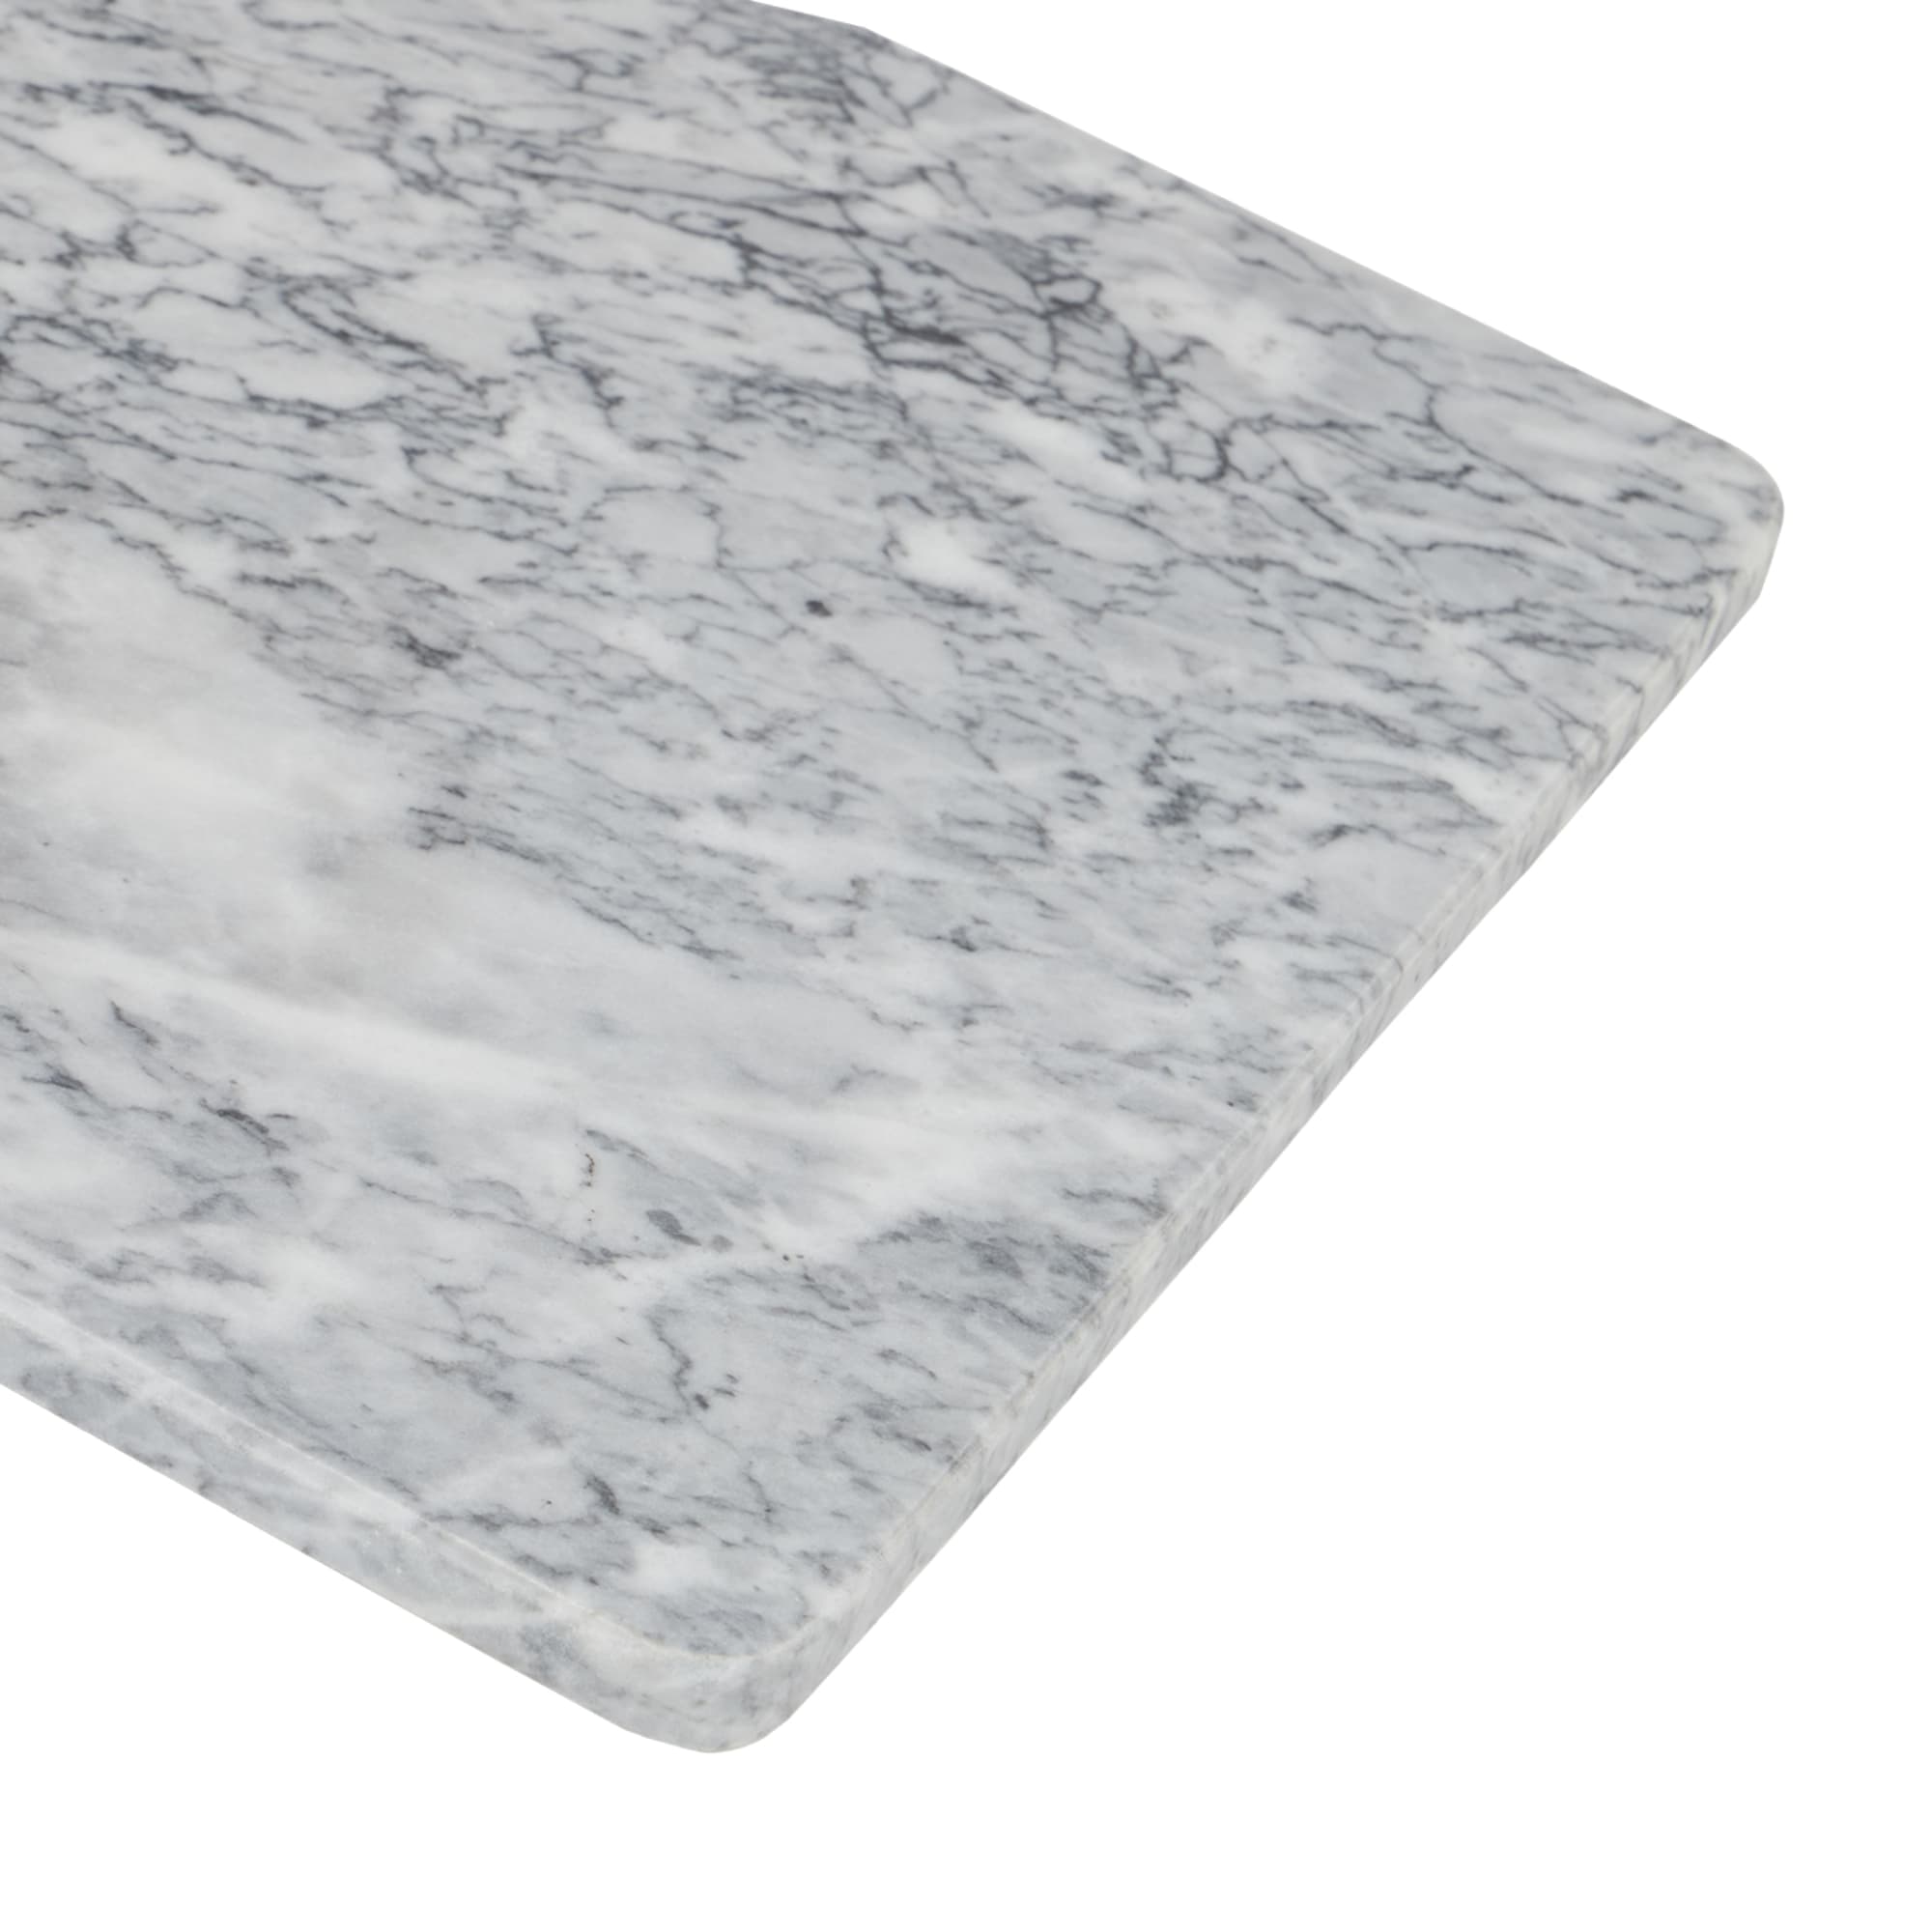 Home Basics Multi-Purpose Pastry Marble Cutting Board, White $15.00 EACH, CASE PACK OF 4